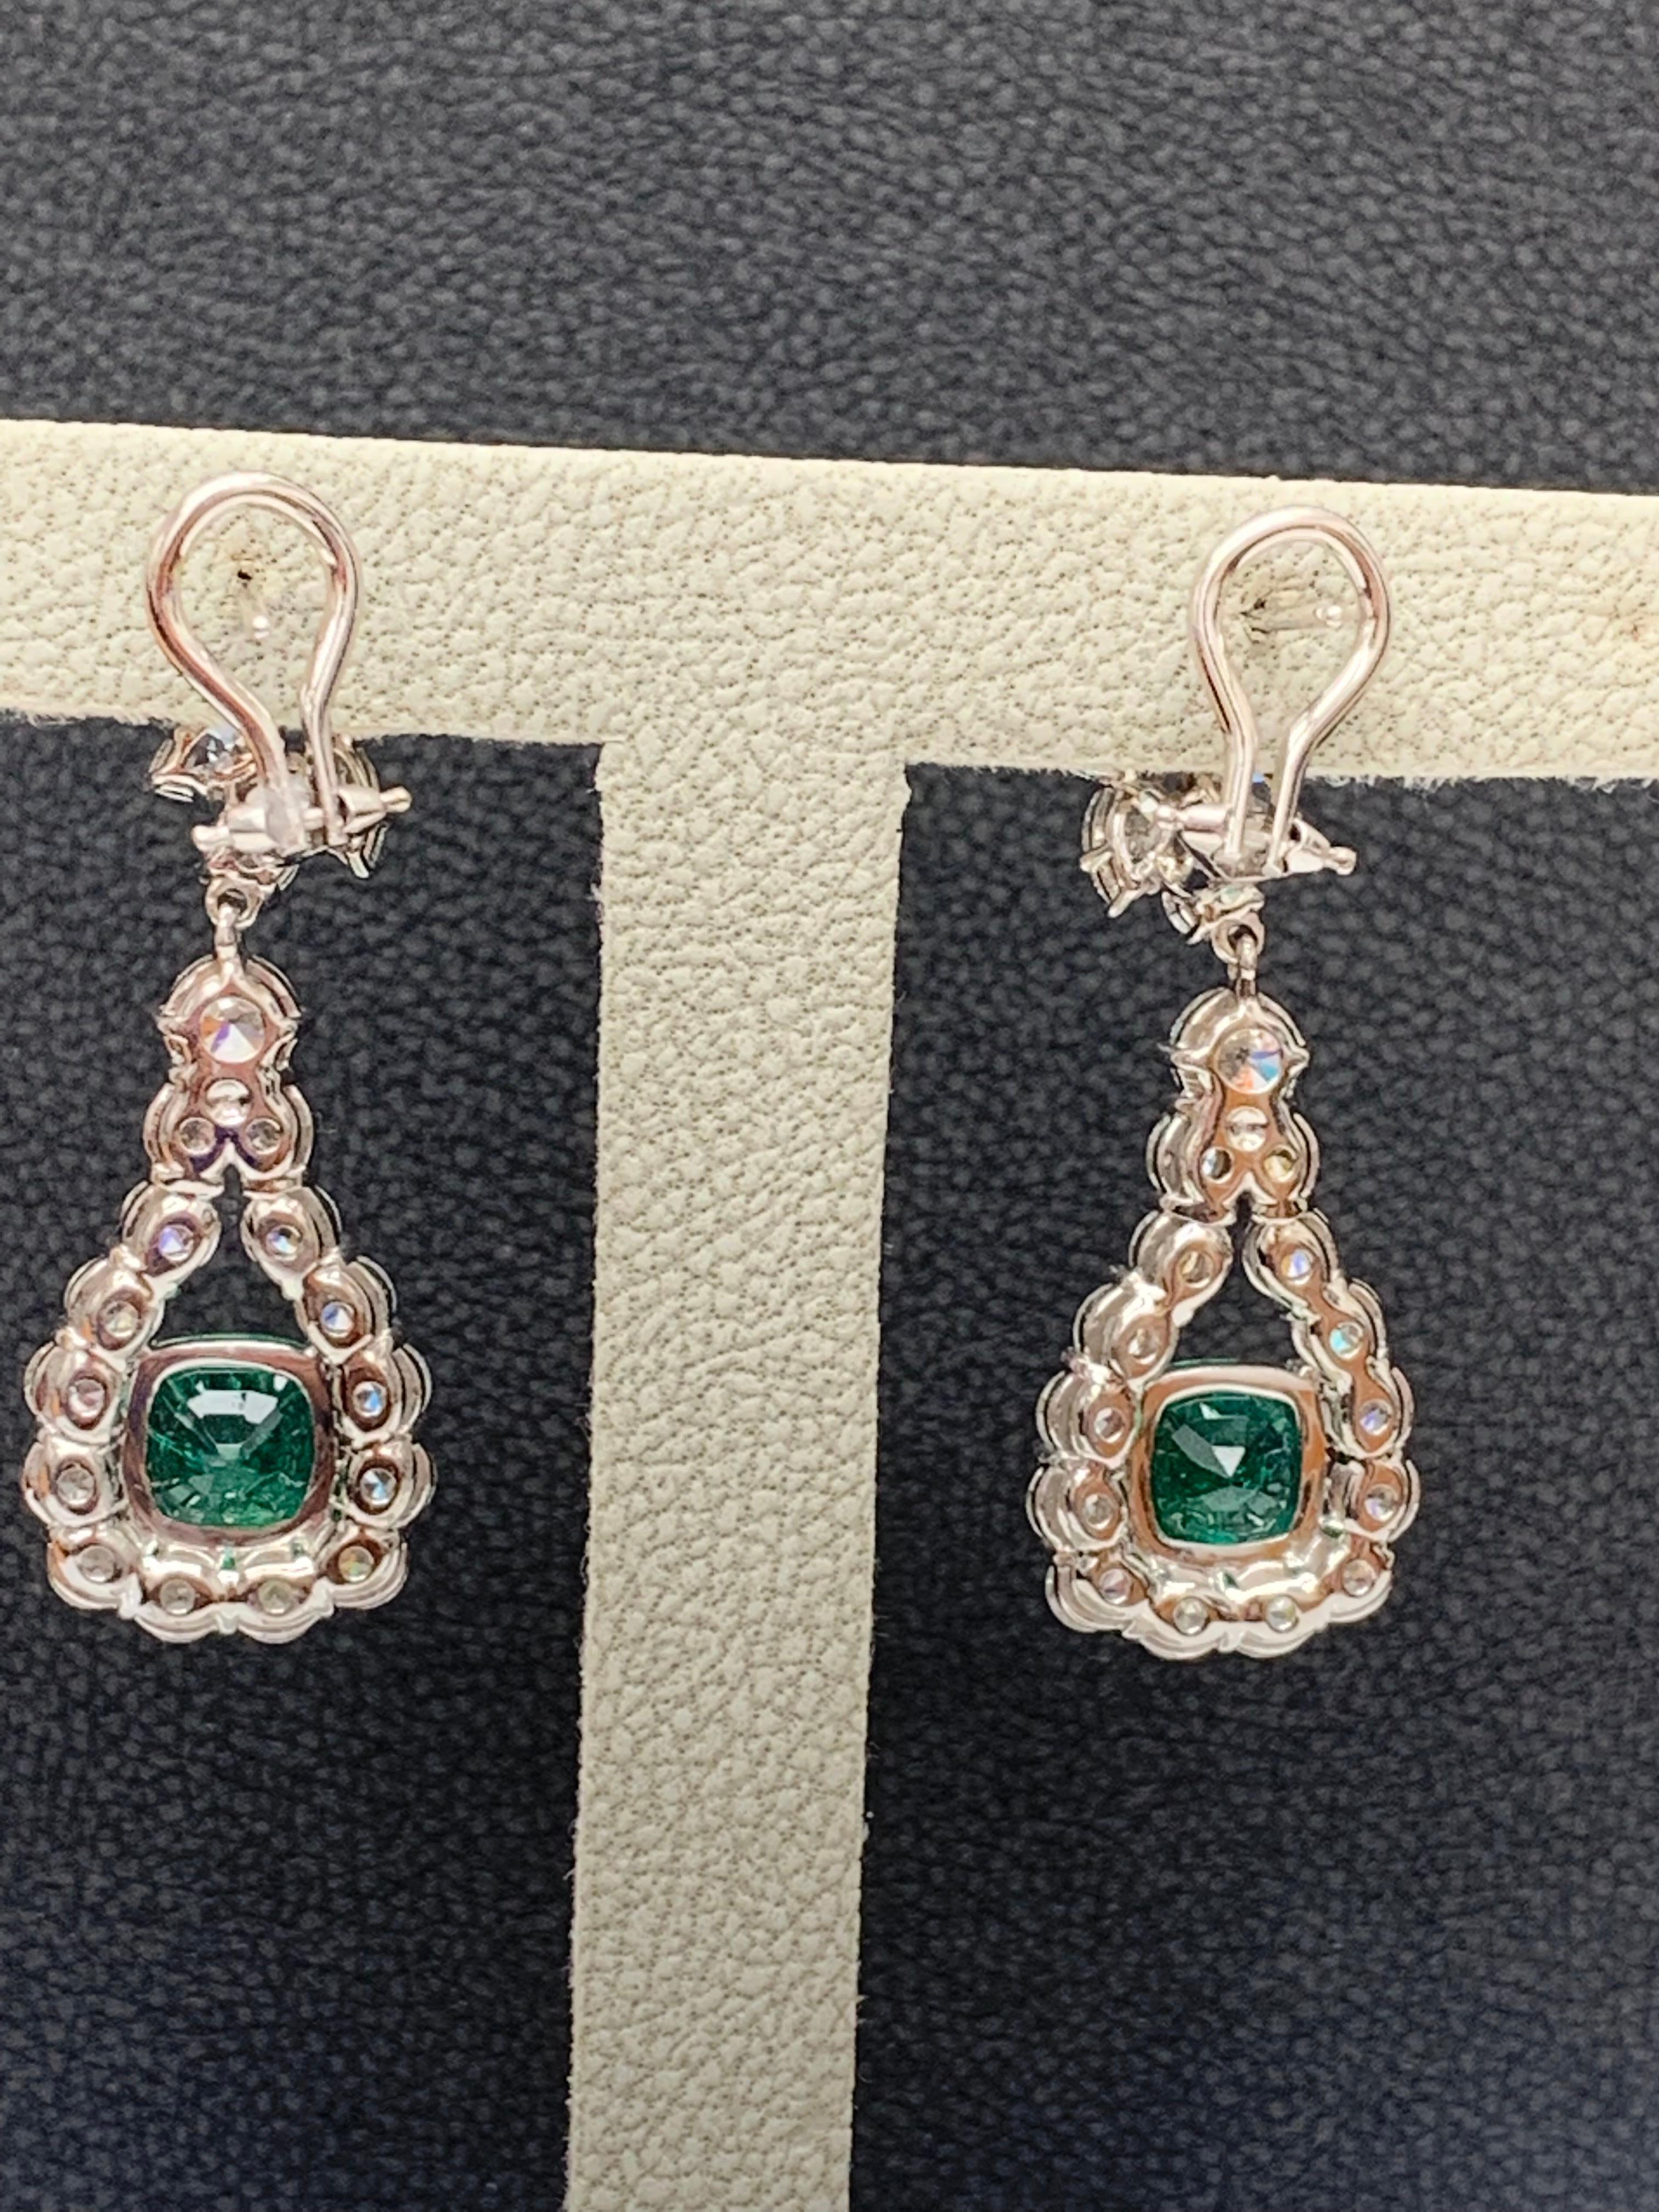 3.49 Carat Cushion Cut Emerald and Diamond Drop Earrings in 18K White Gold For Sale 6